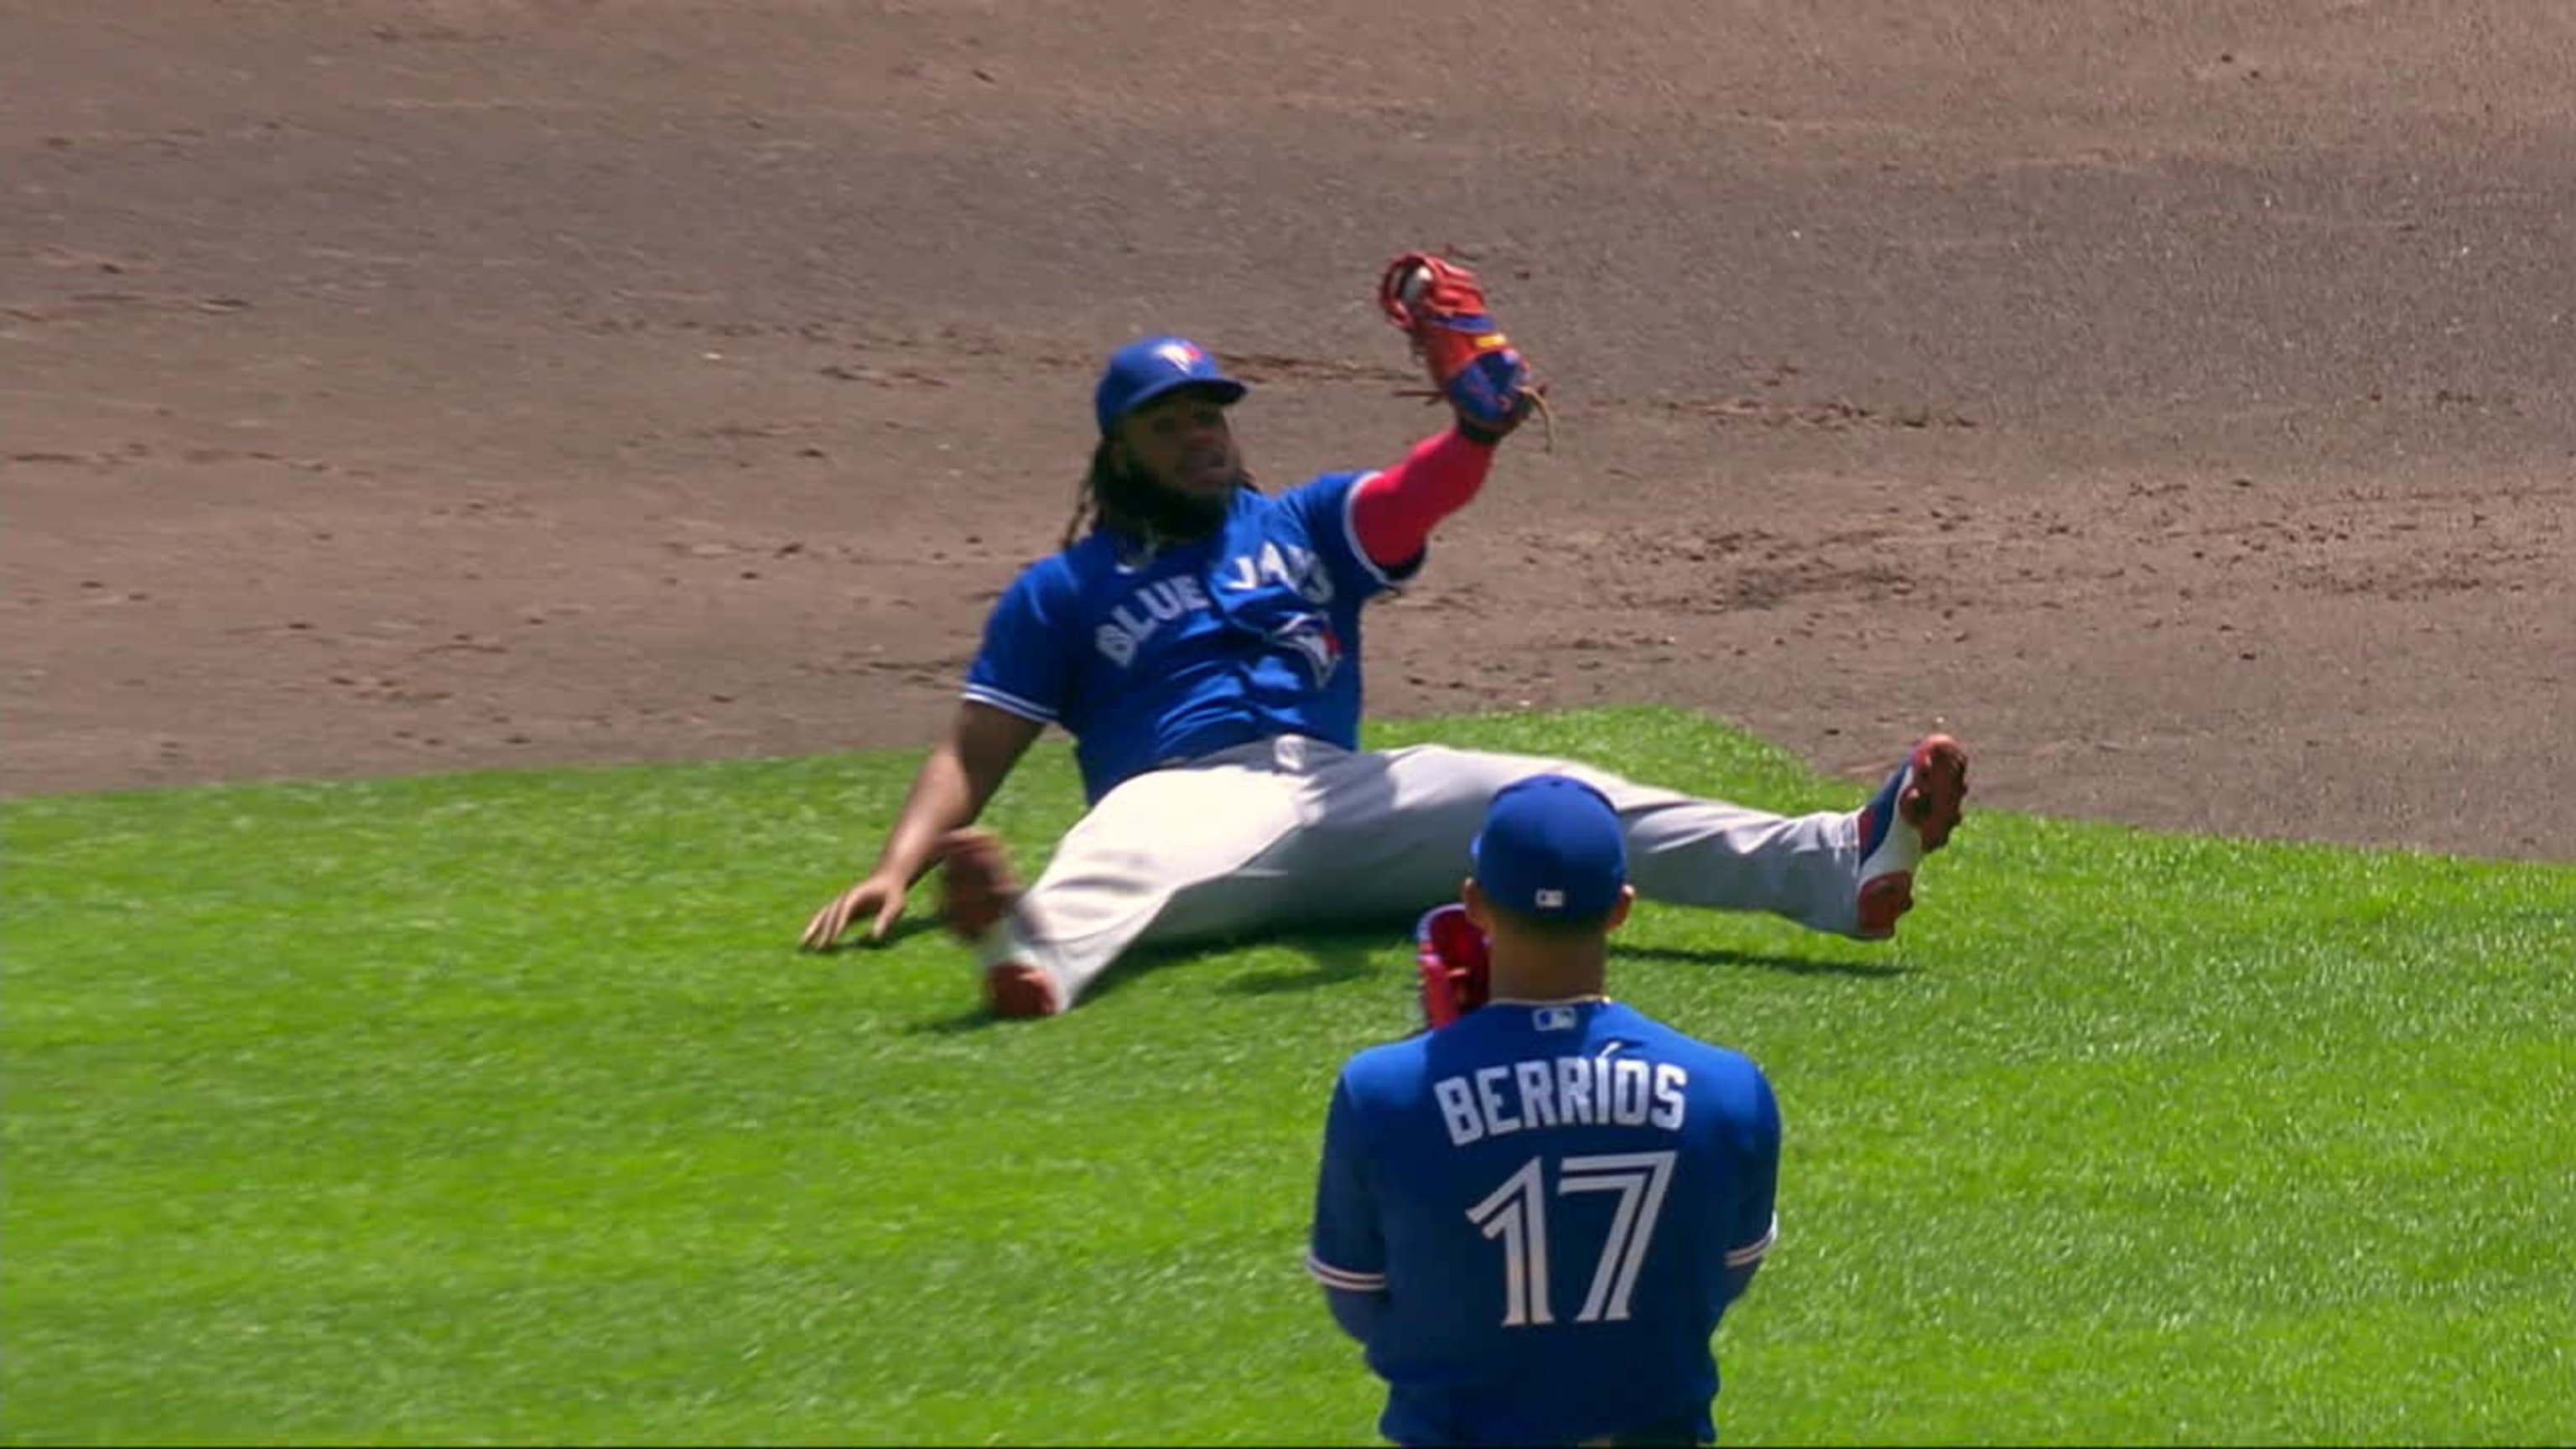 Blue Jays beat Twins 3-0 on Berrios' pitching, Kirk's hitting